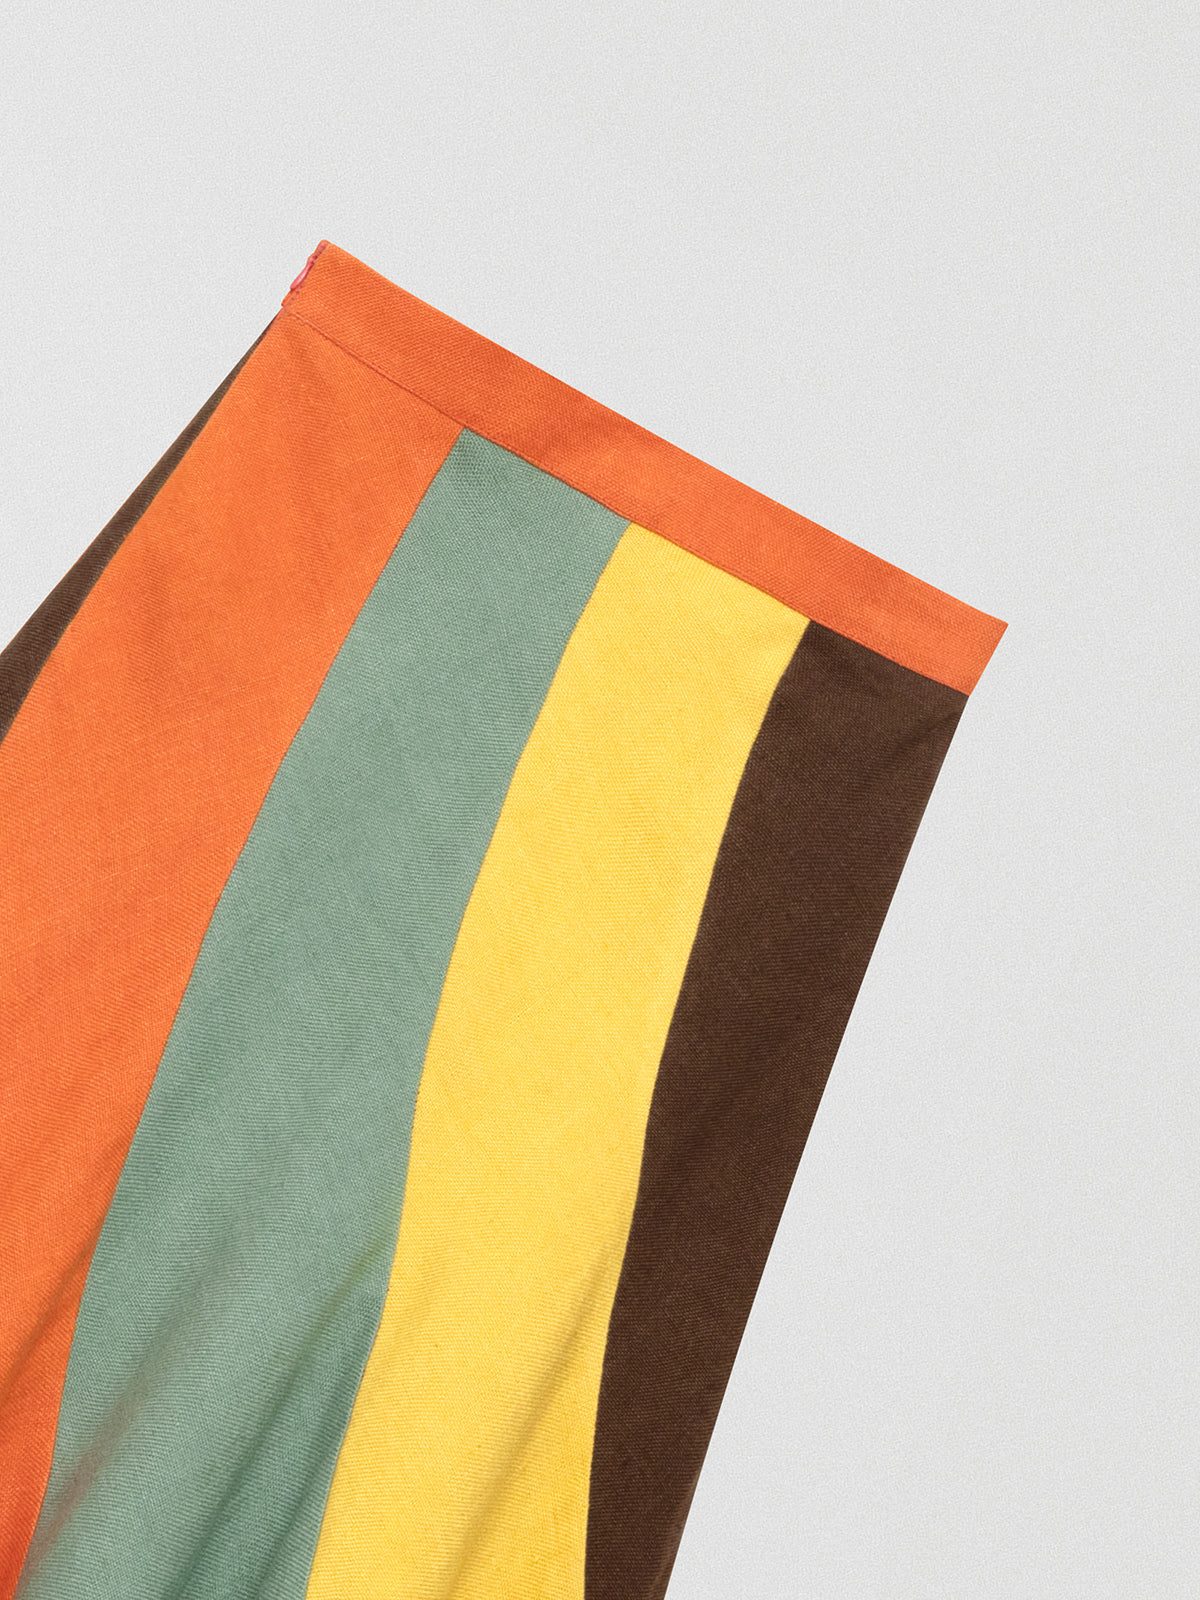 Flared linen midi skirt with asymmetric print in orange, yellow, green and brown.